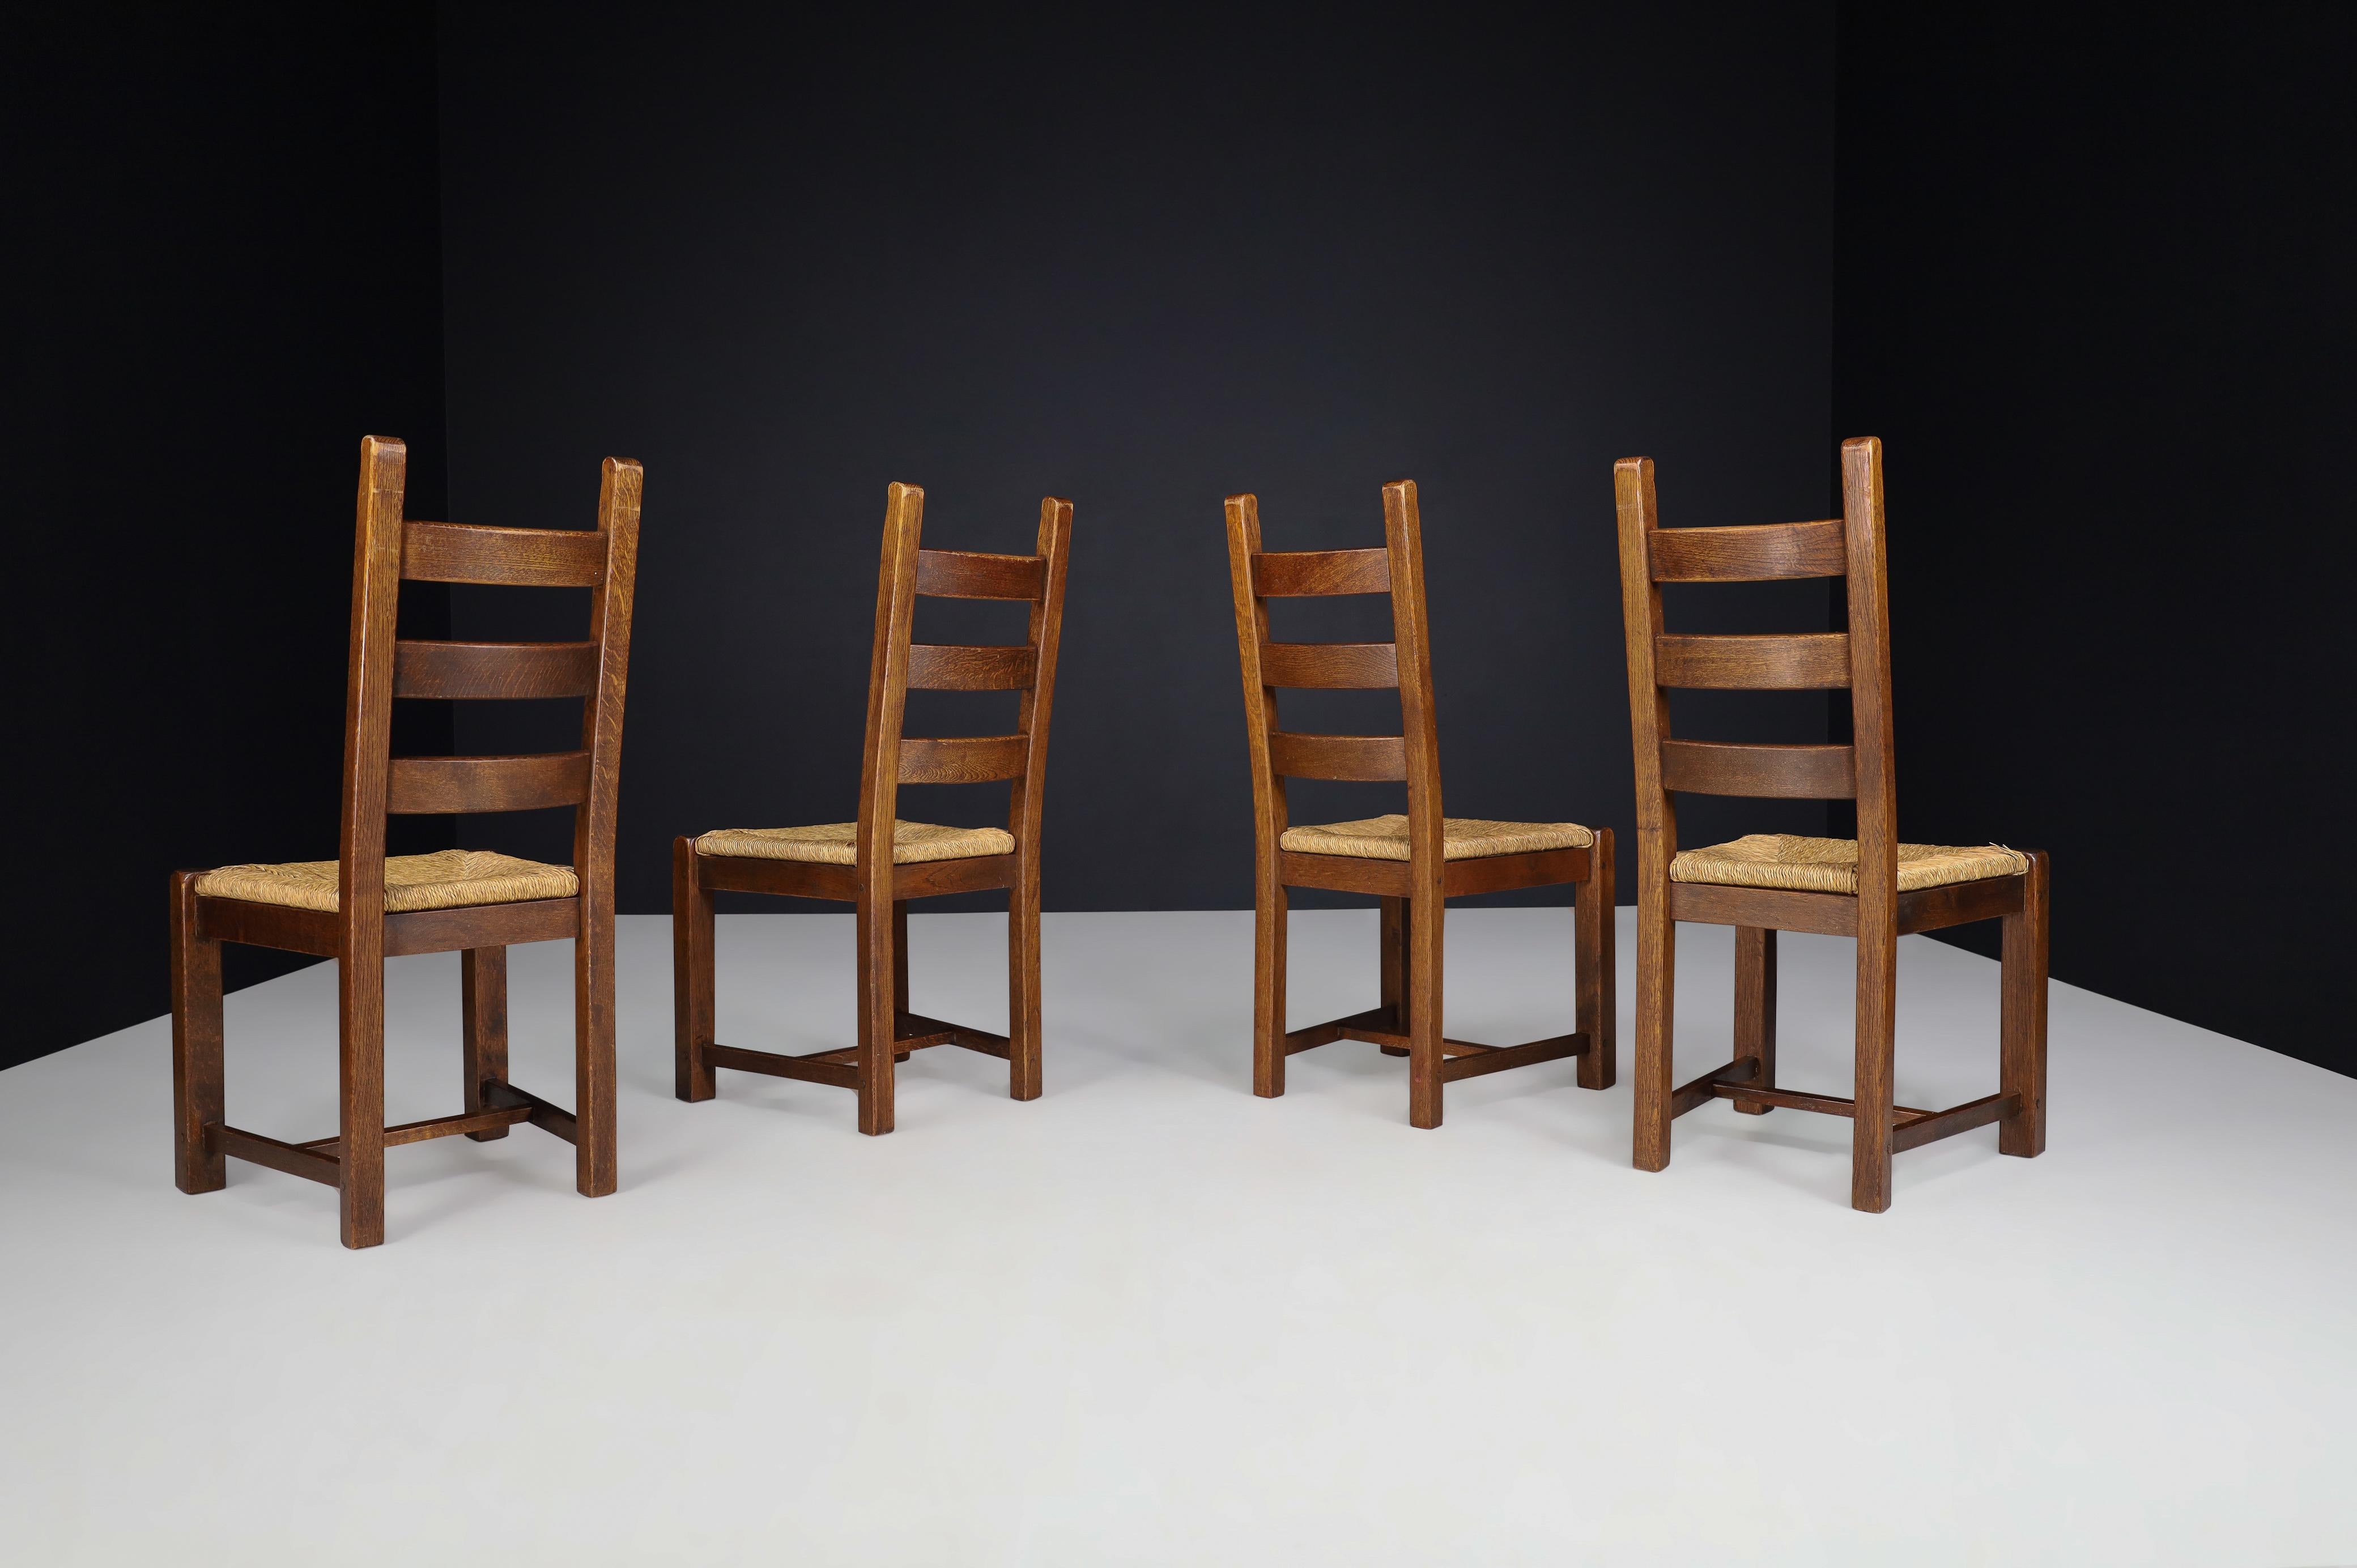 Oak and Rush Rustic Dining Chairs, France, 1960s For Sale 2